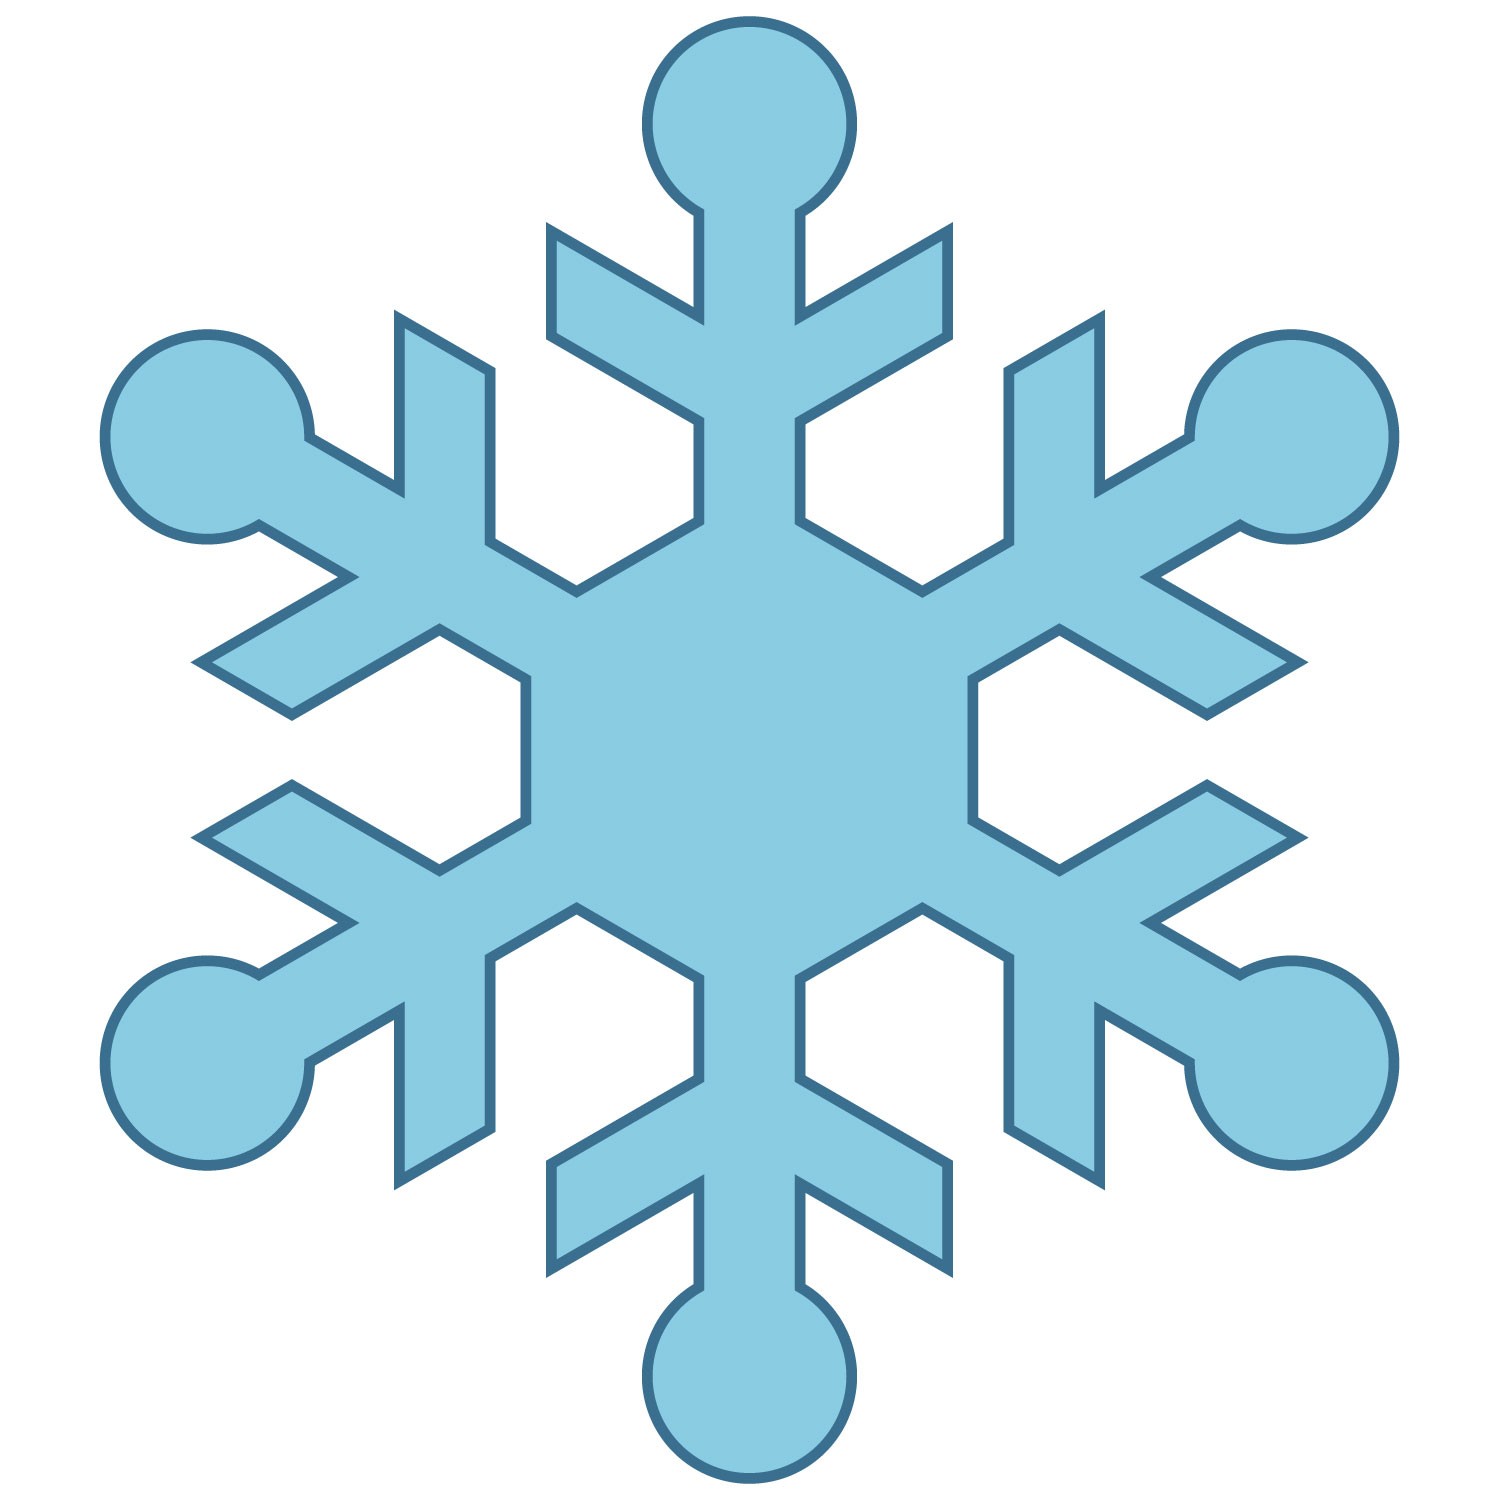 Simple Snowflake Clipart